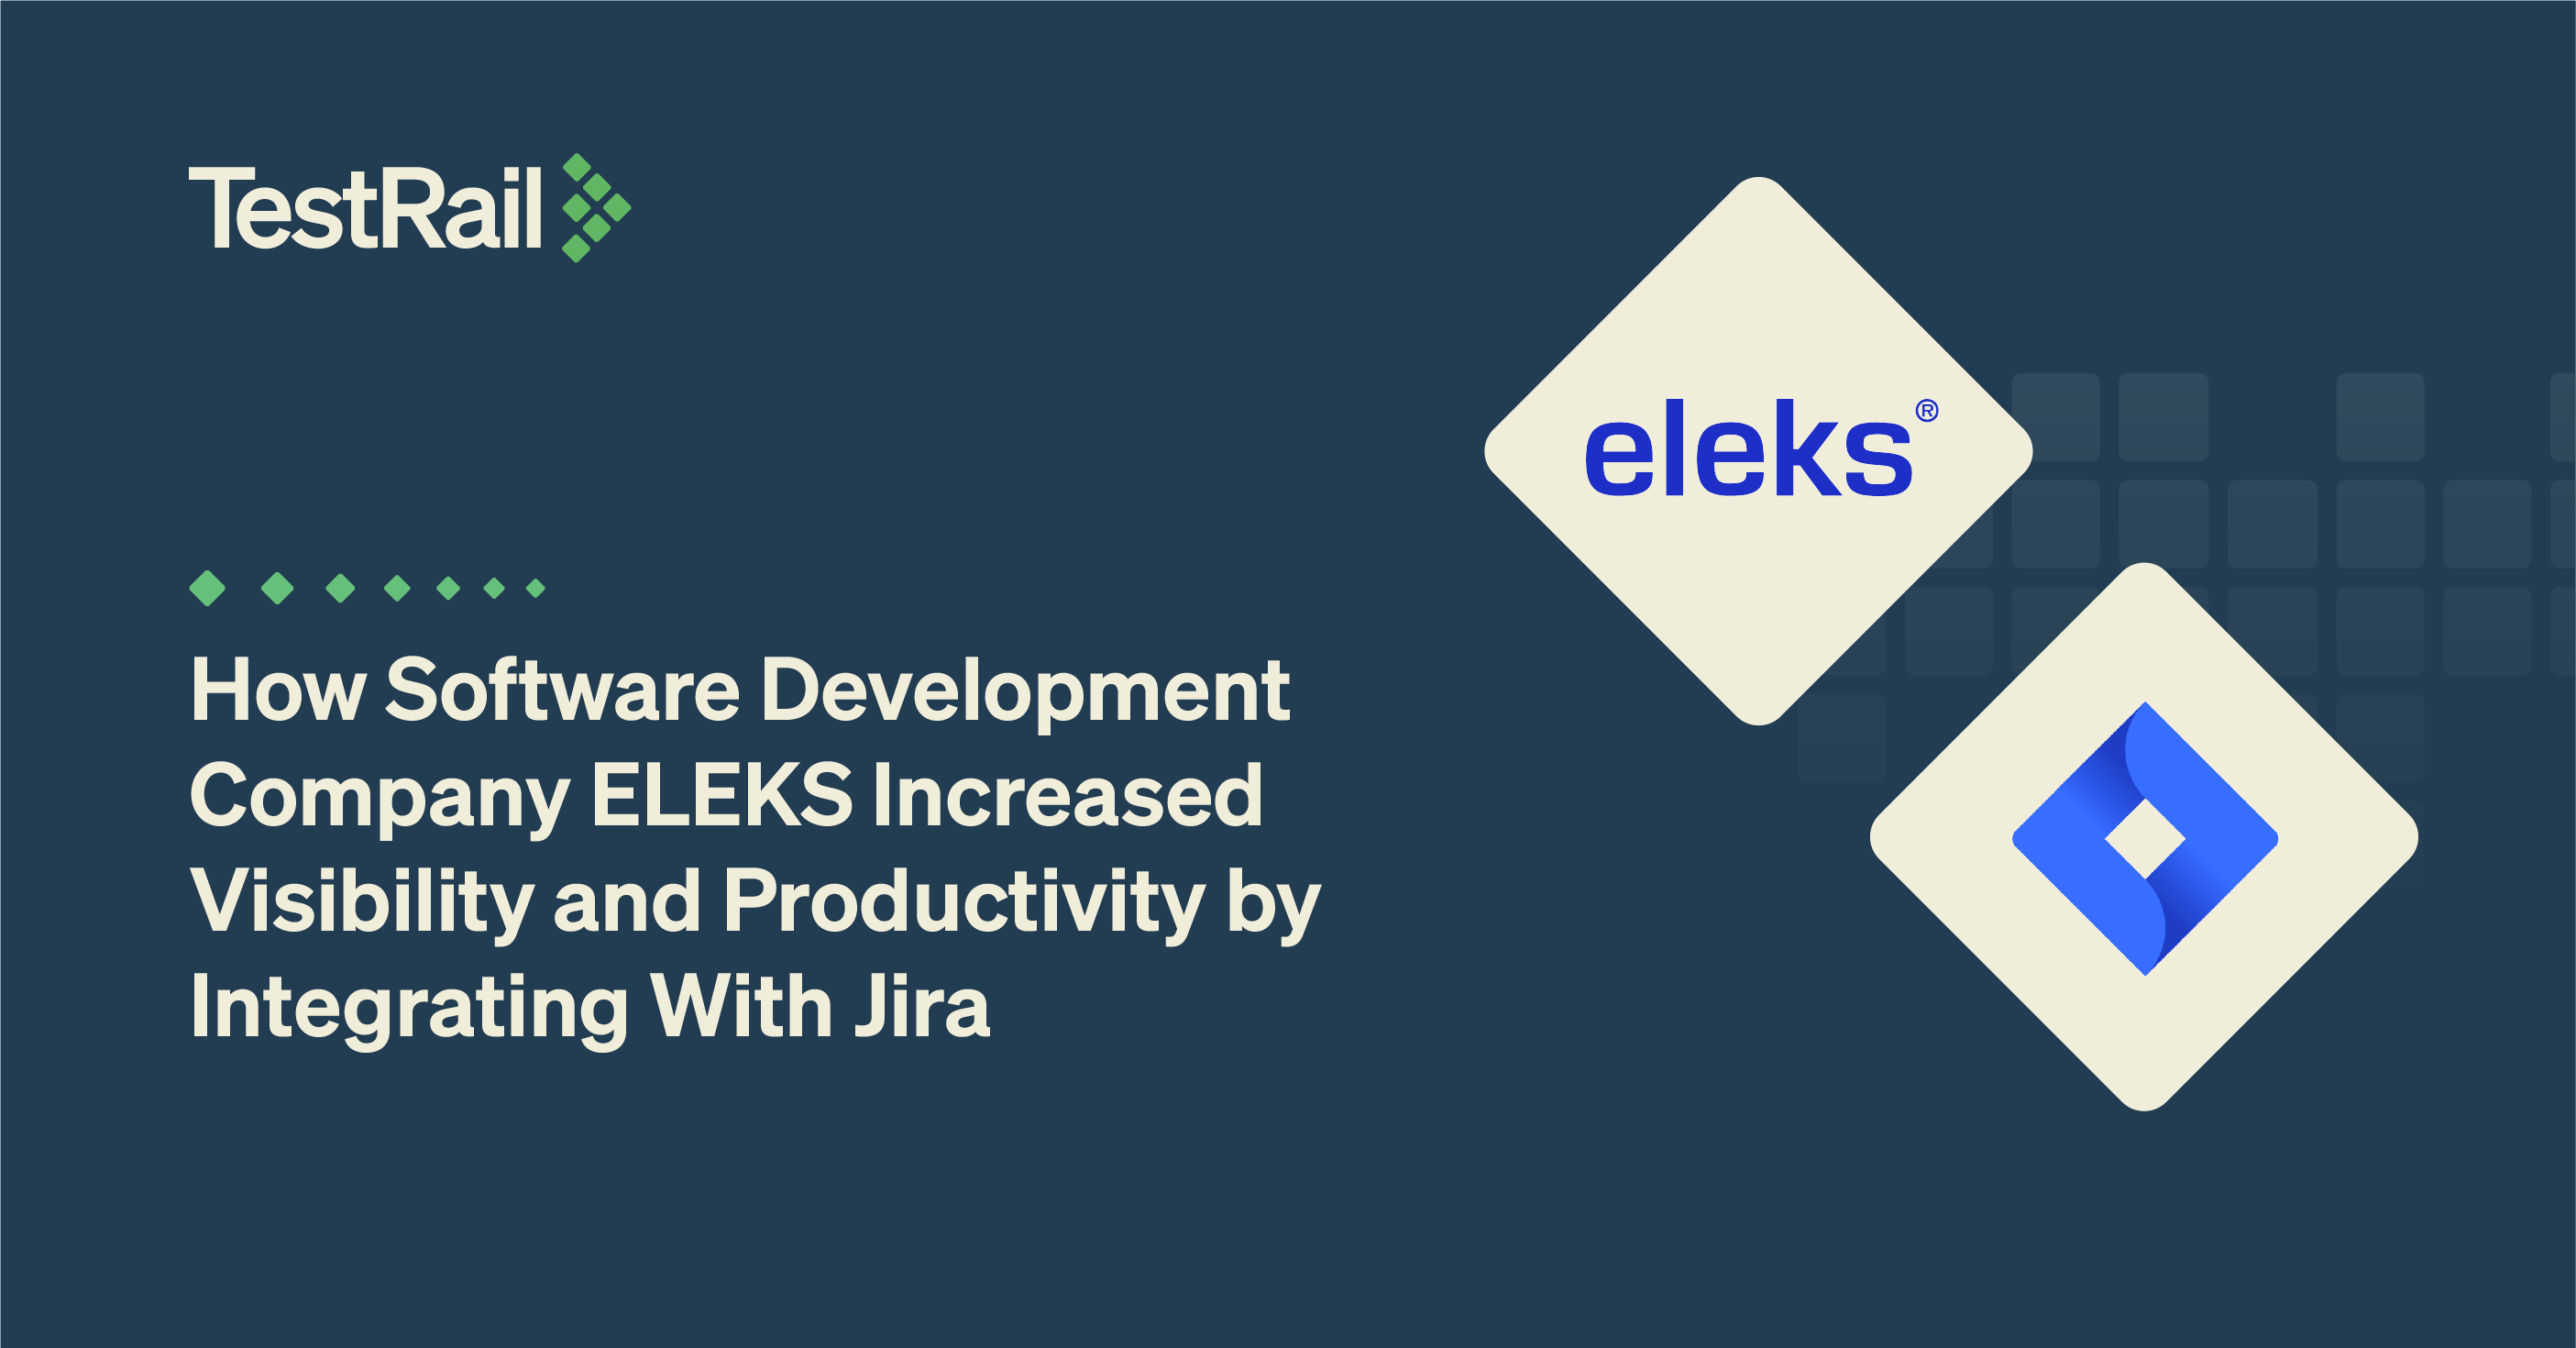 How Software Development Company ELEKS Increased Visibility and Productivity by Integrating Jira with TestRail